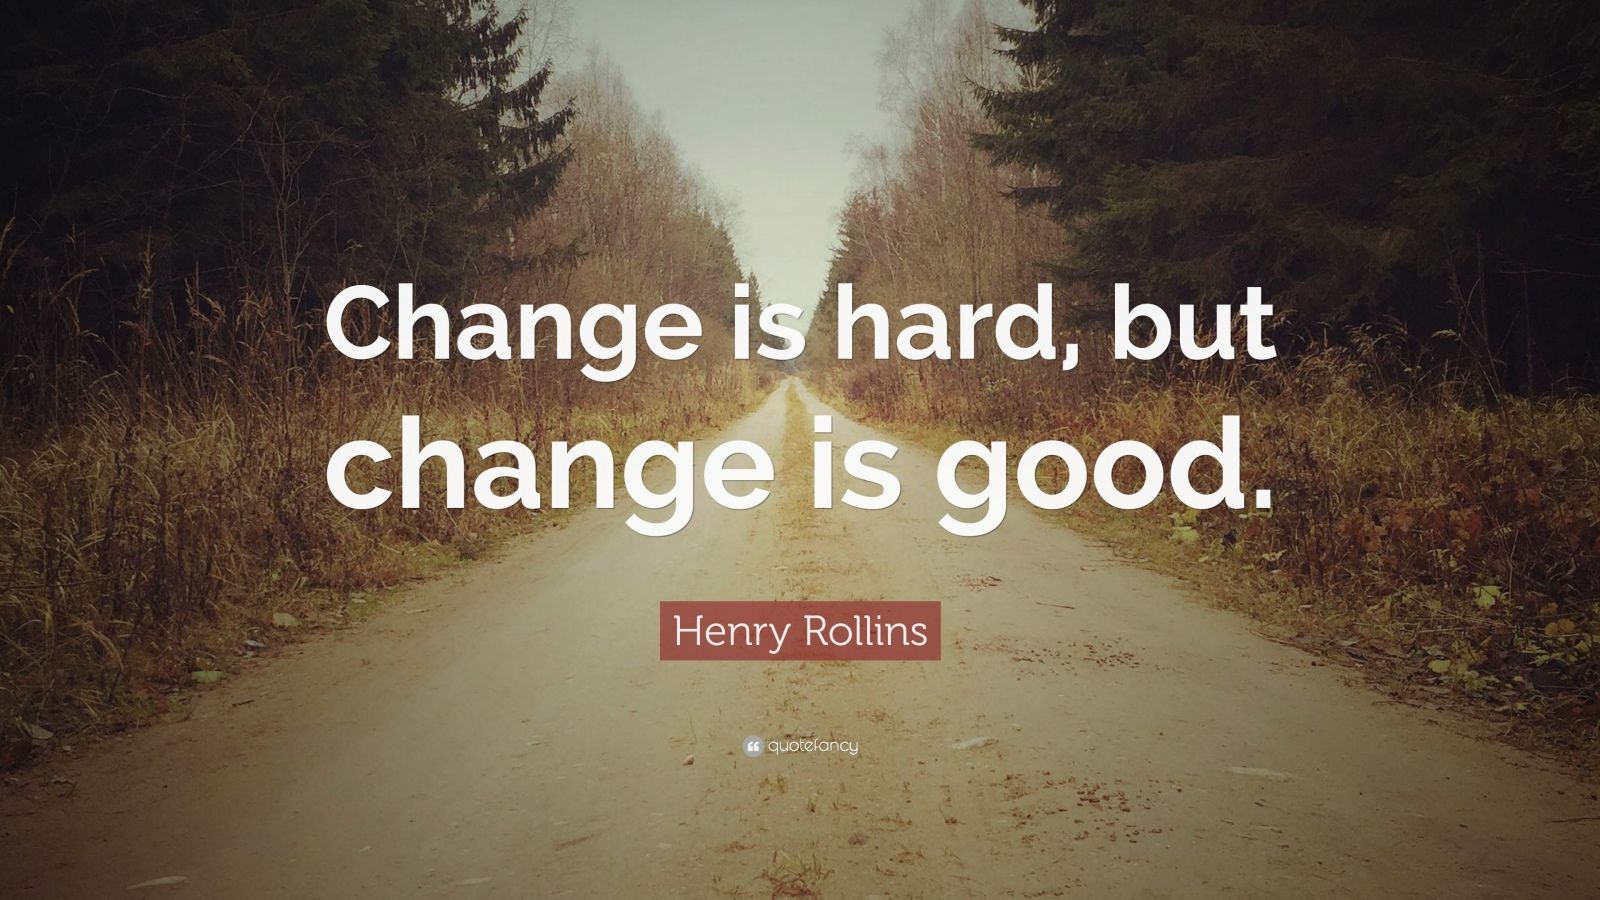 Henry Rollins Quote: “Change is hard, but change is good.” (12